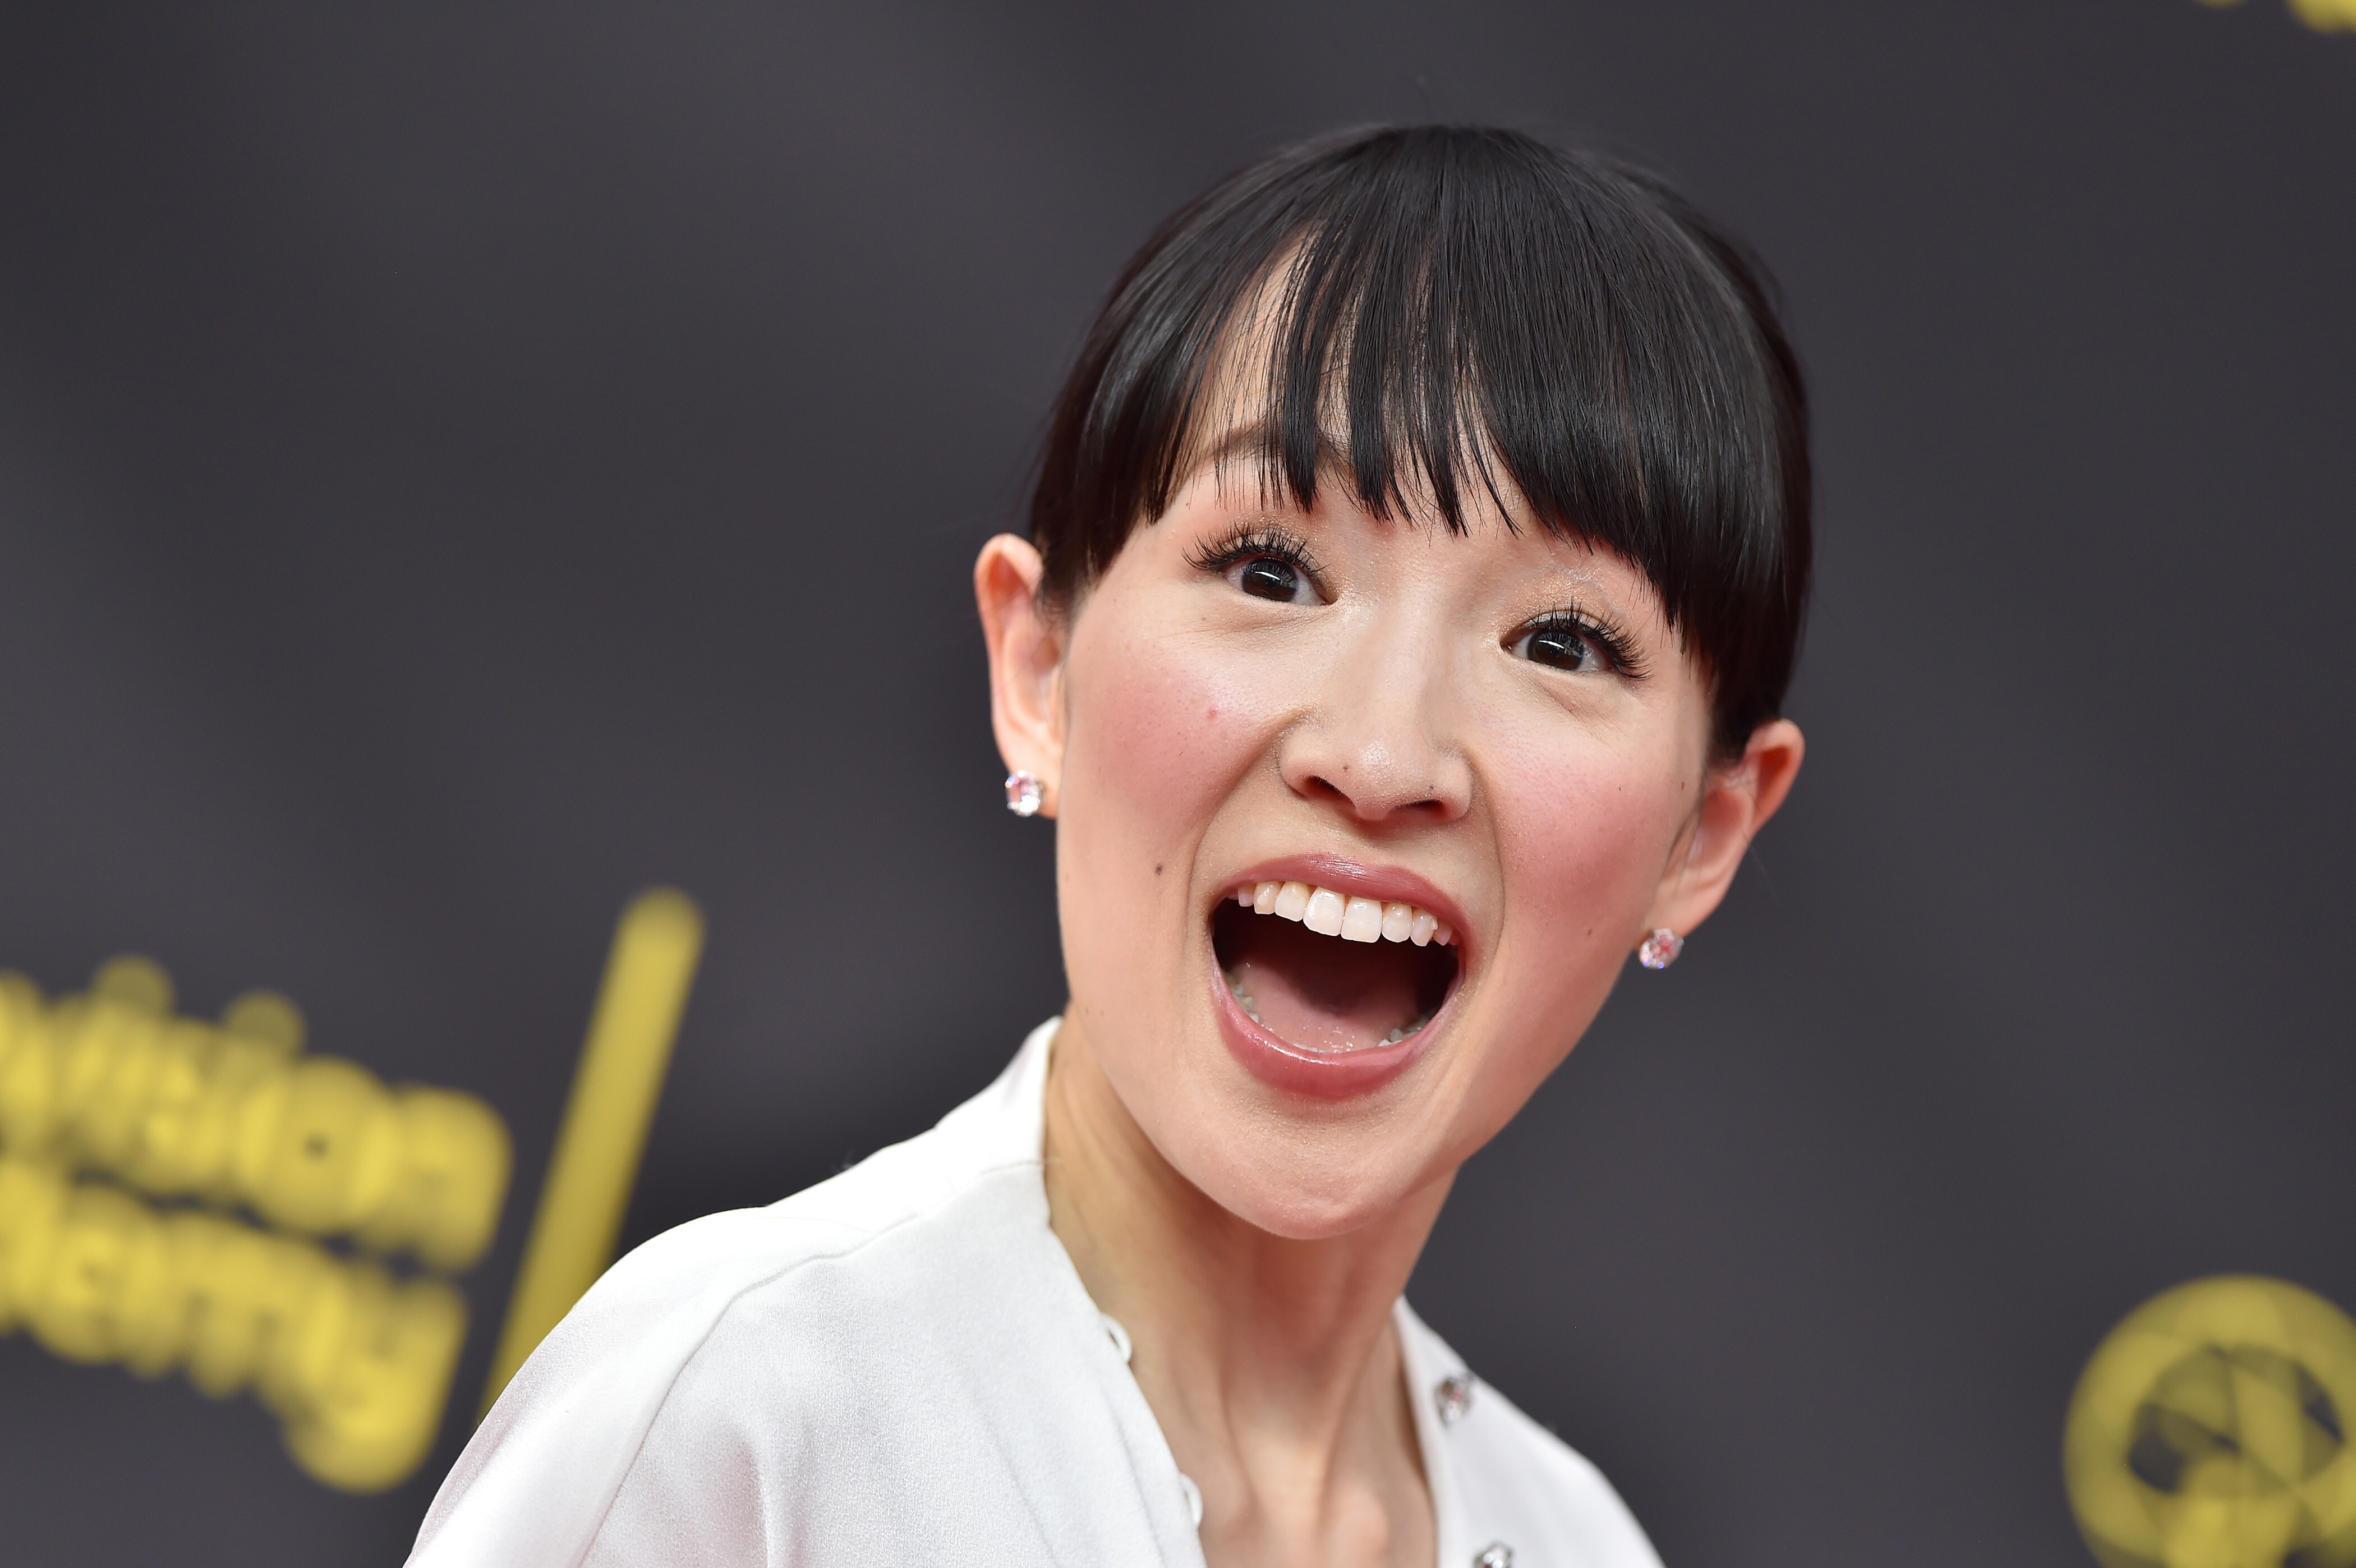 Kondo attends the 2019 Creative Arts Emmy Awards, in Los Angeles, California, in September 2019. Photo: Axelle/Bauer-Griffin/FilmMagic